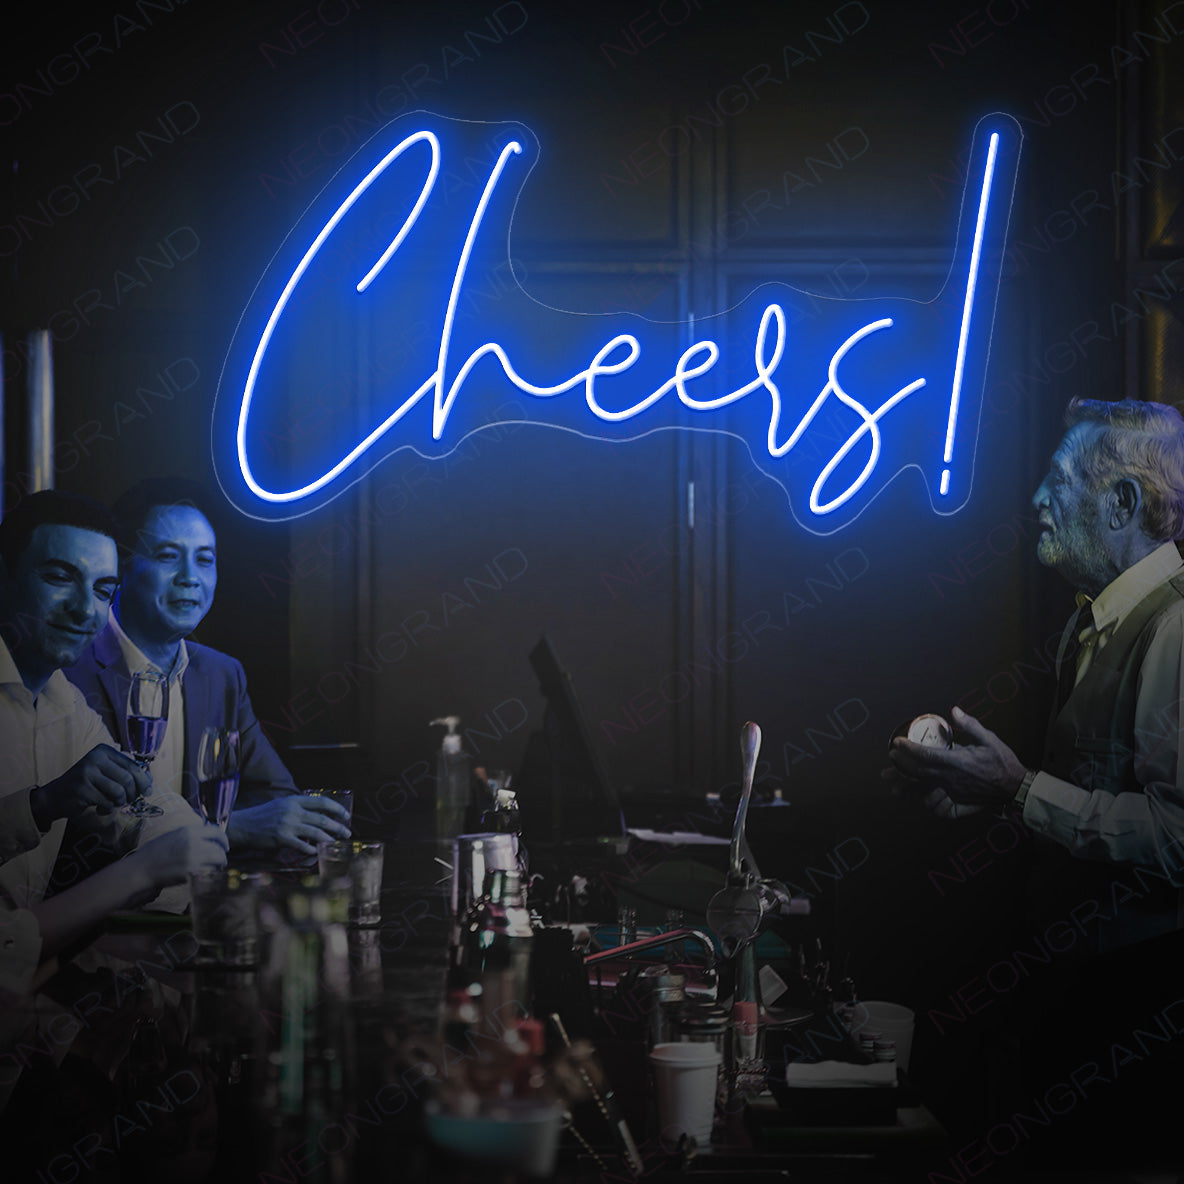 Cheers Neon Sign Led Light Up Sign